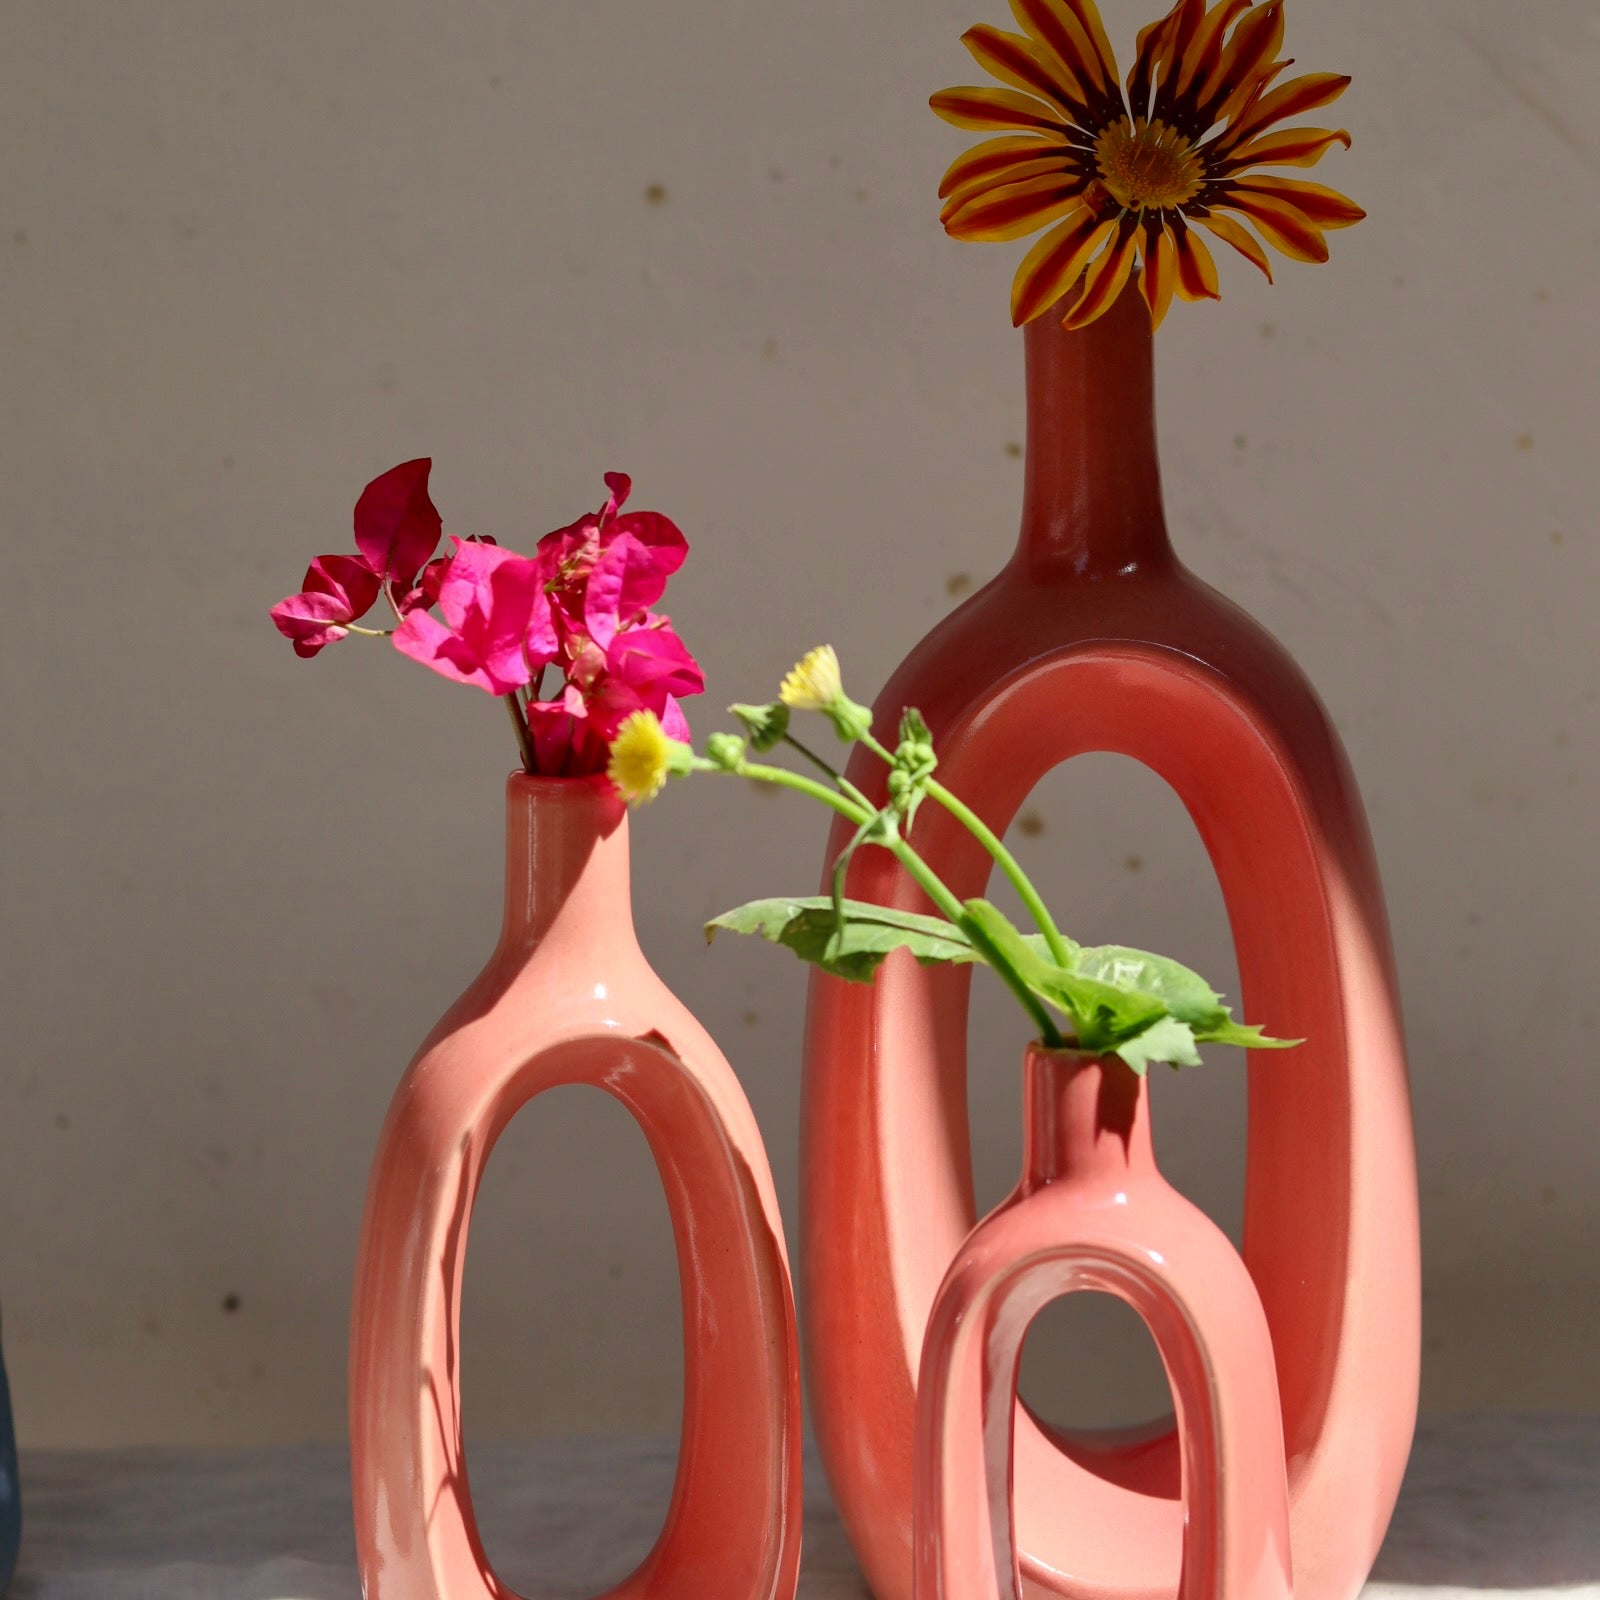 Ceramic pink vases with flowers 